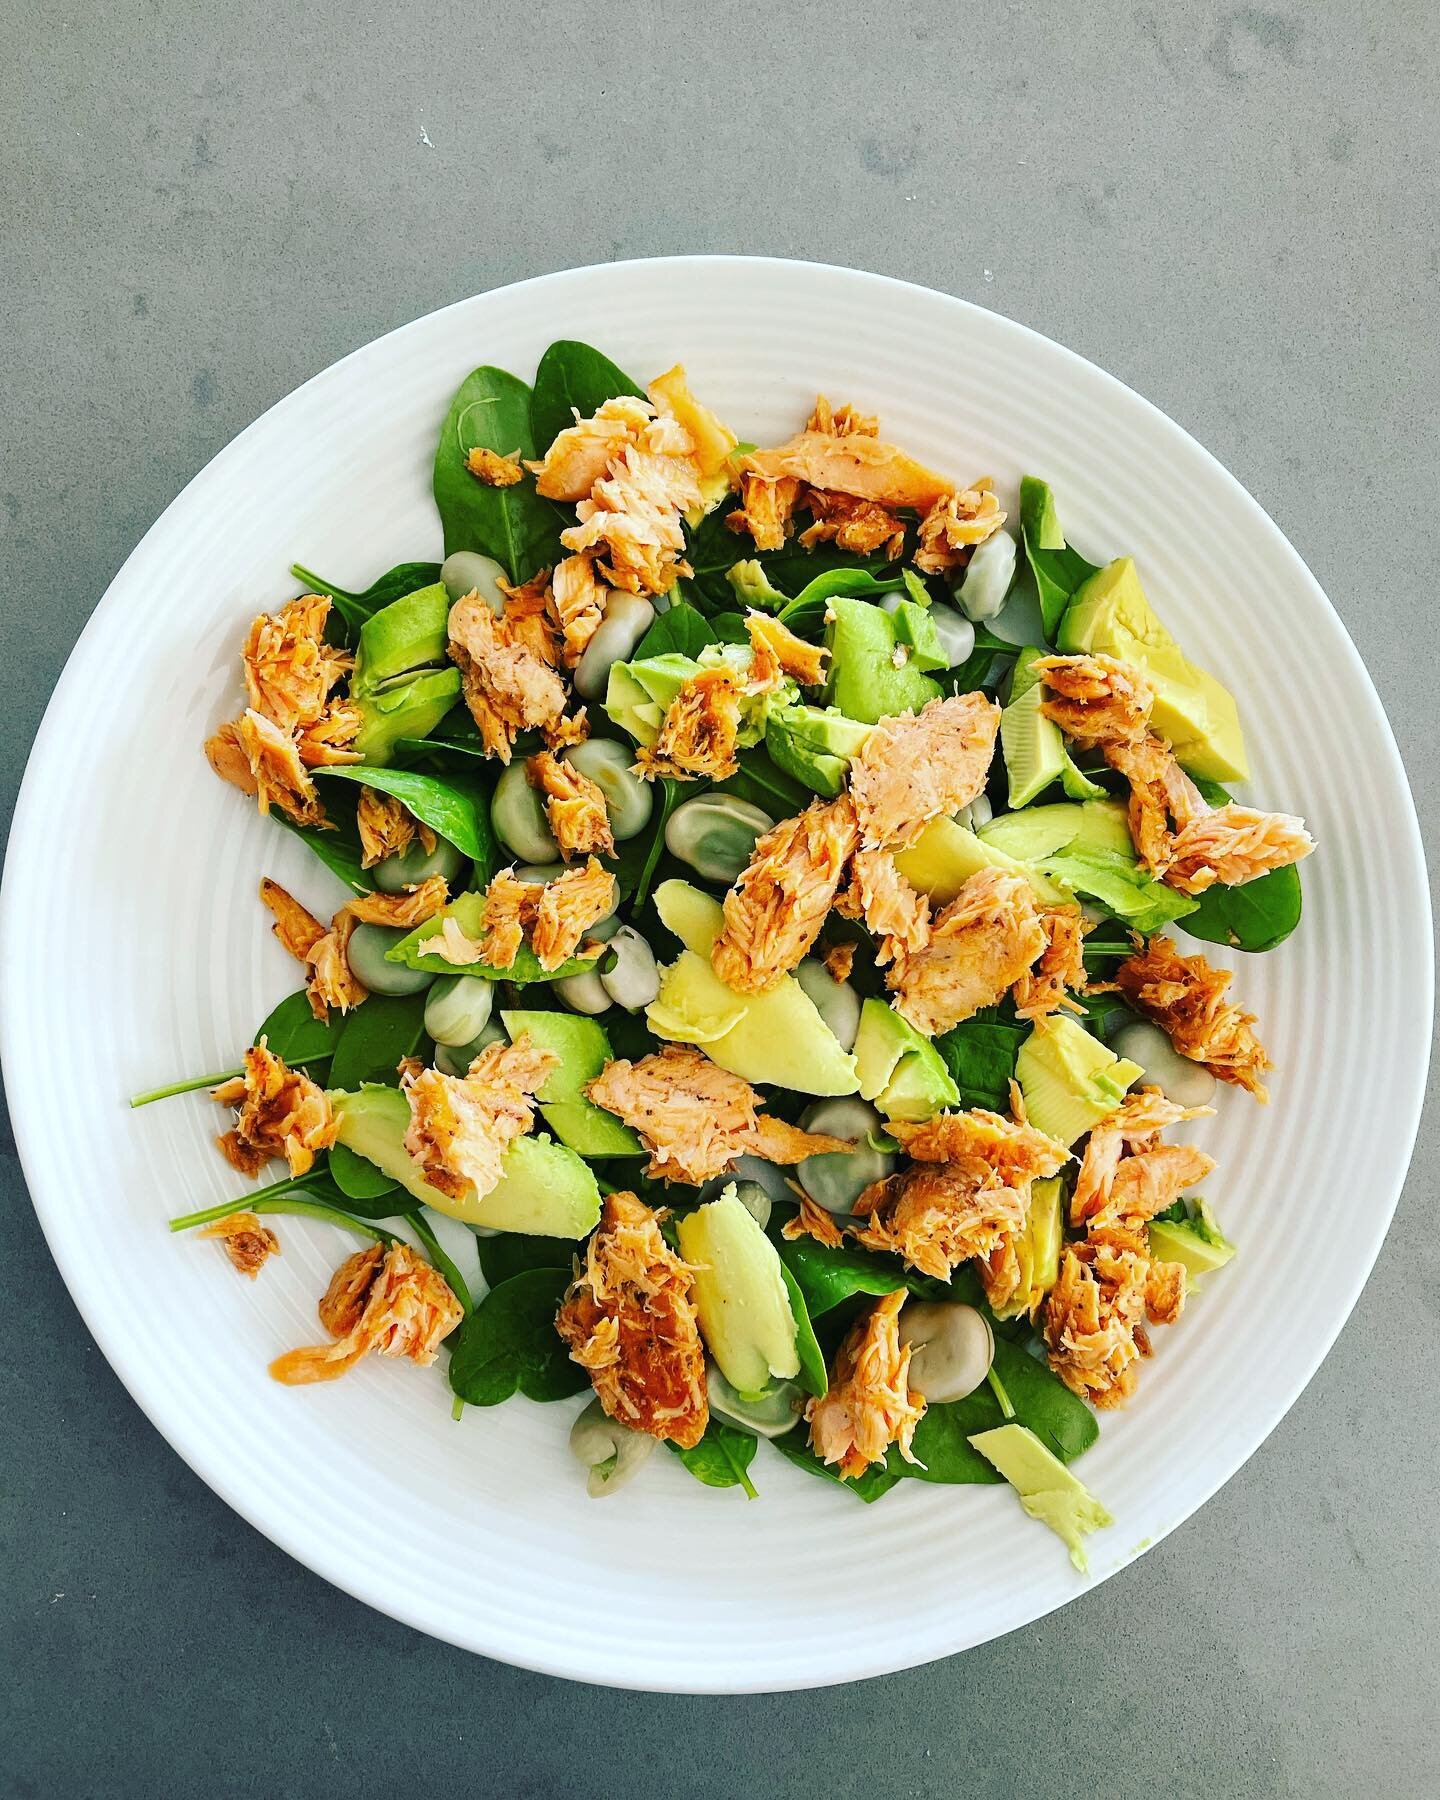 One of the many meal ideas that I share with the September Team Challenge ladies. 
I thought I&rsquo;d share what I had for lunch today for some inspo: 
Smoked salmon, edamame, avocado and baby spinach with a drizzle of balsamic vinegar. 
.
Smoked sa